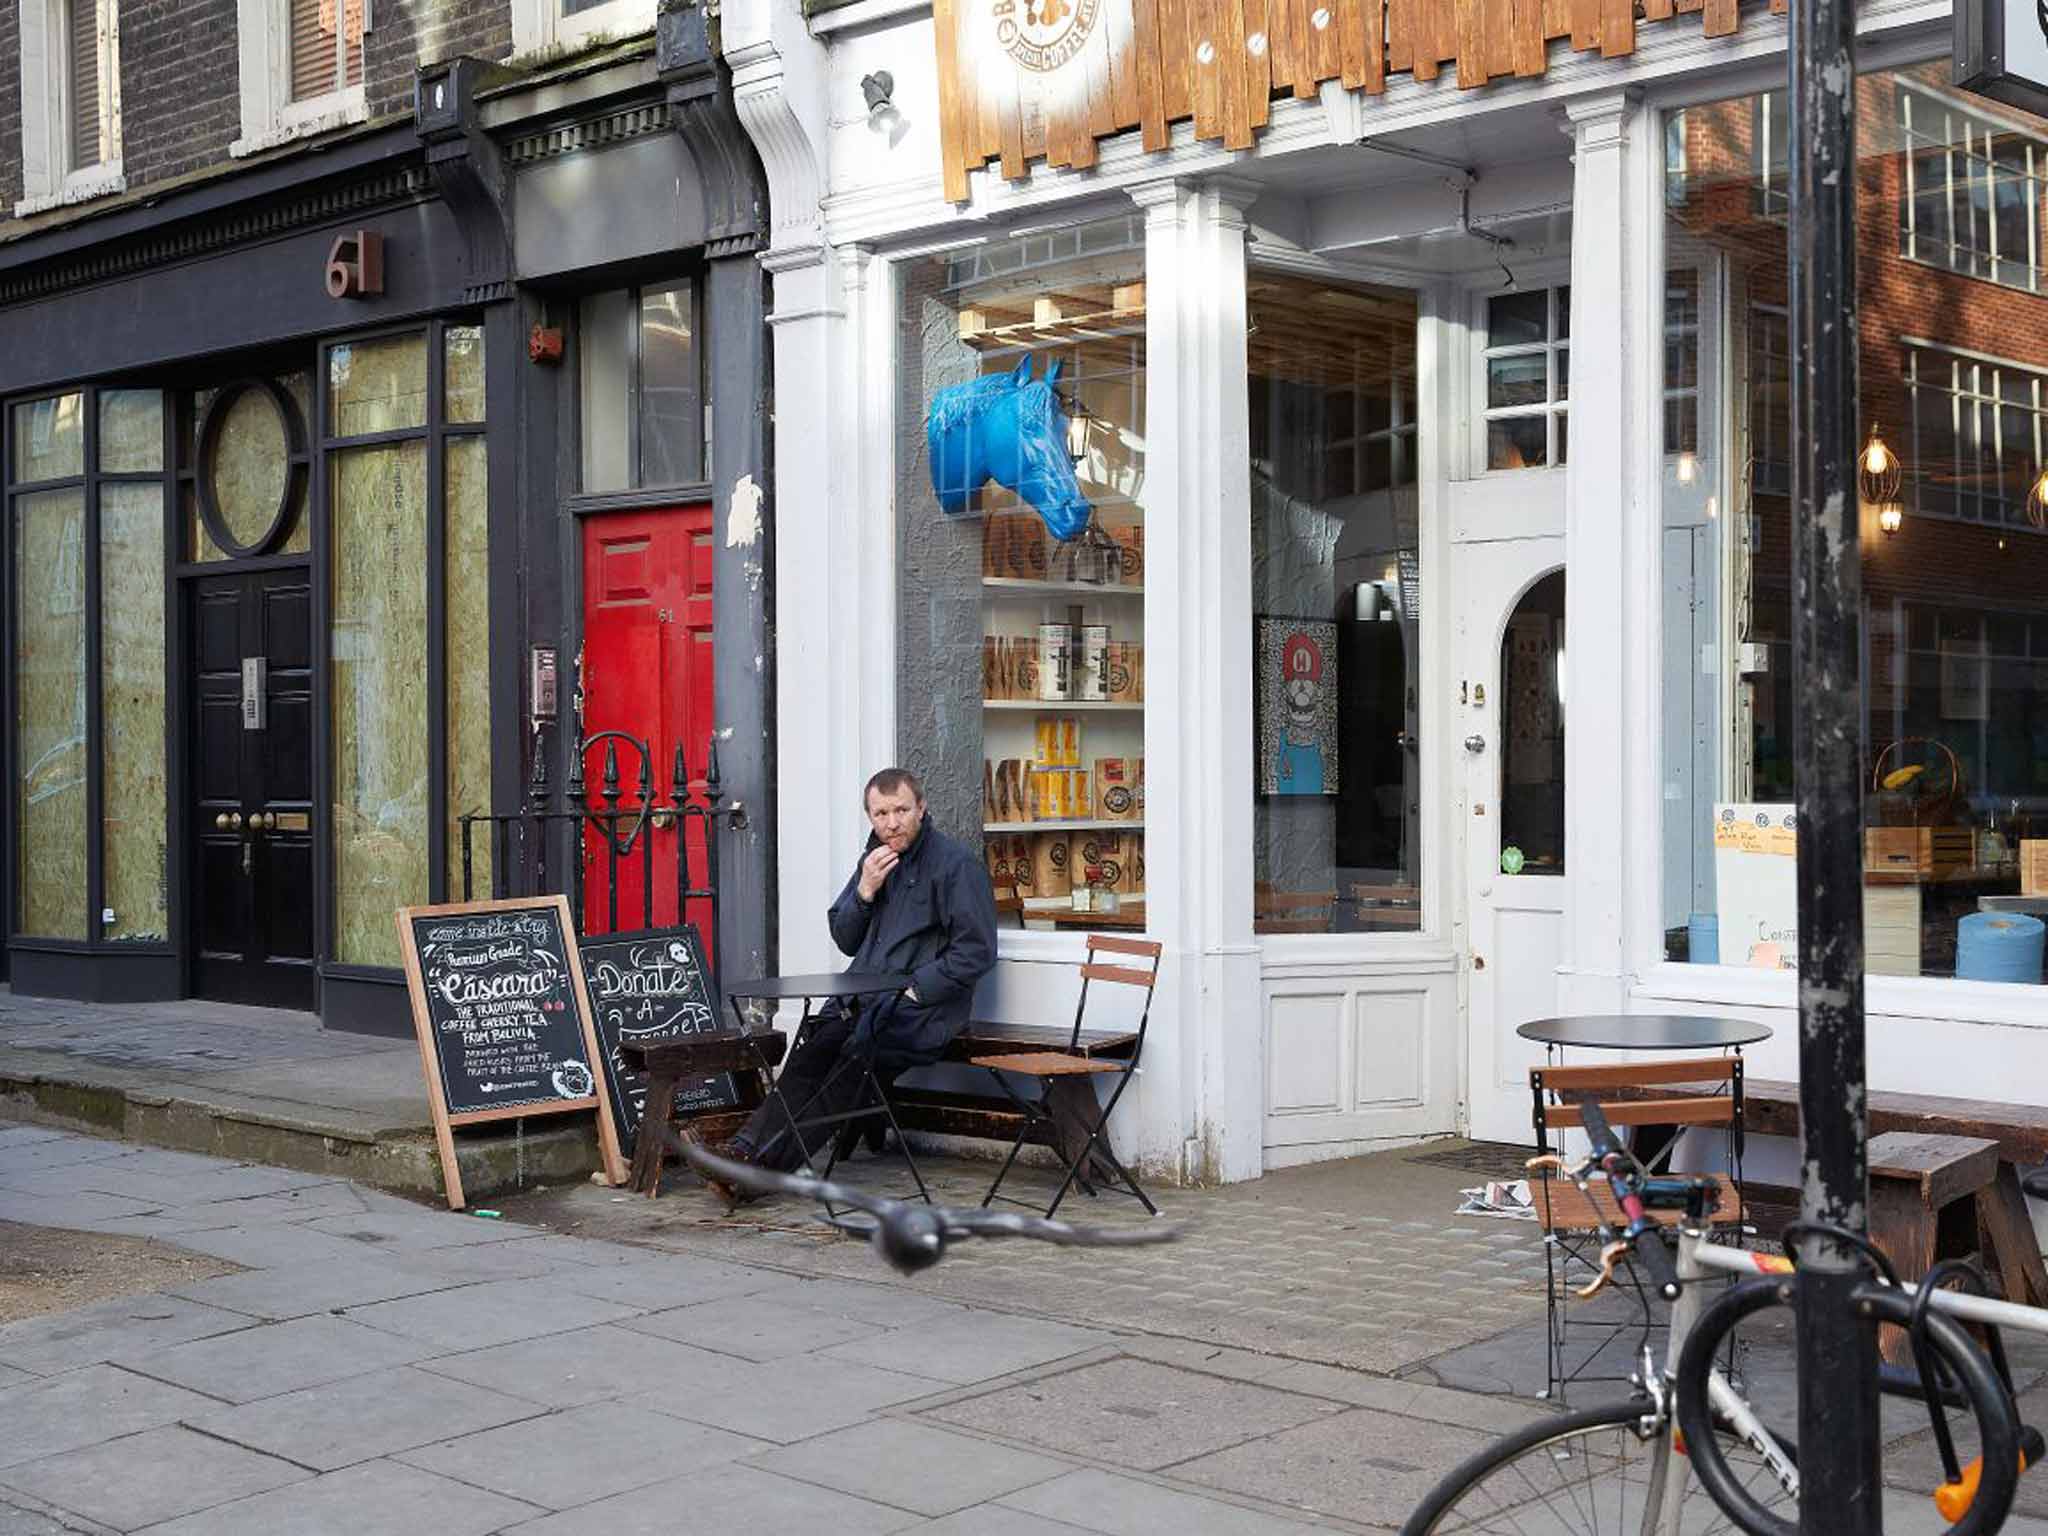 Guy Ritchie, waiting for a coffee at his local café in Fitzrovia